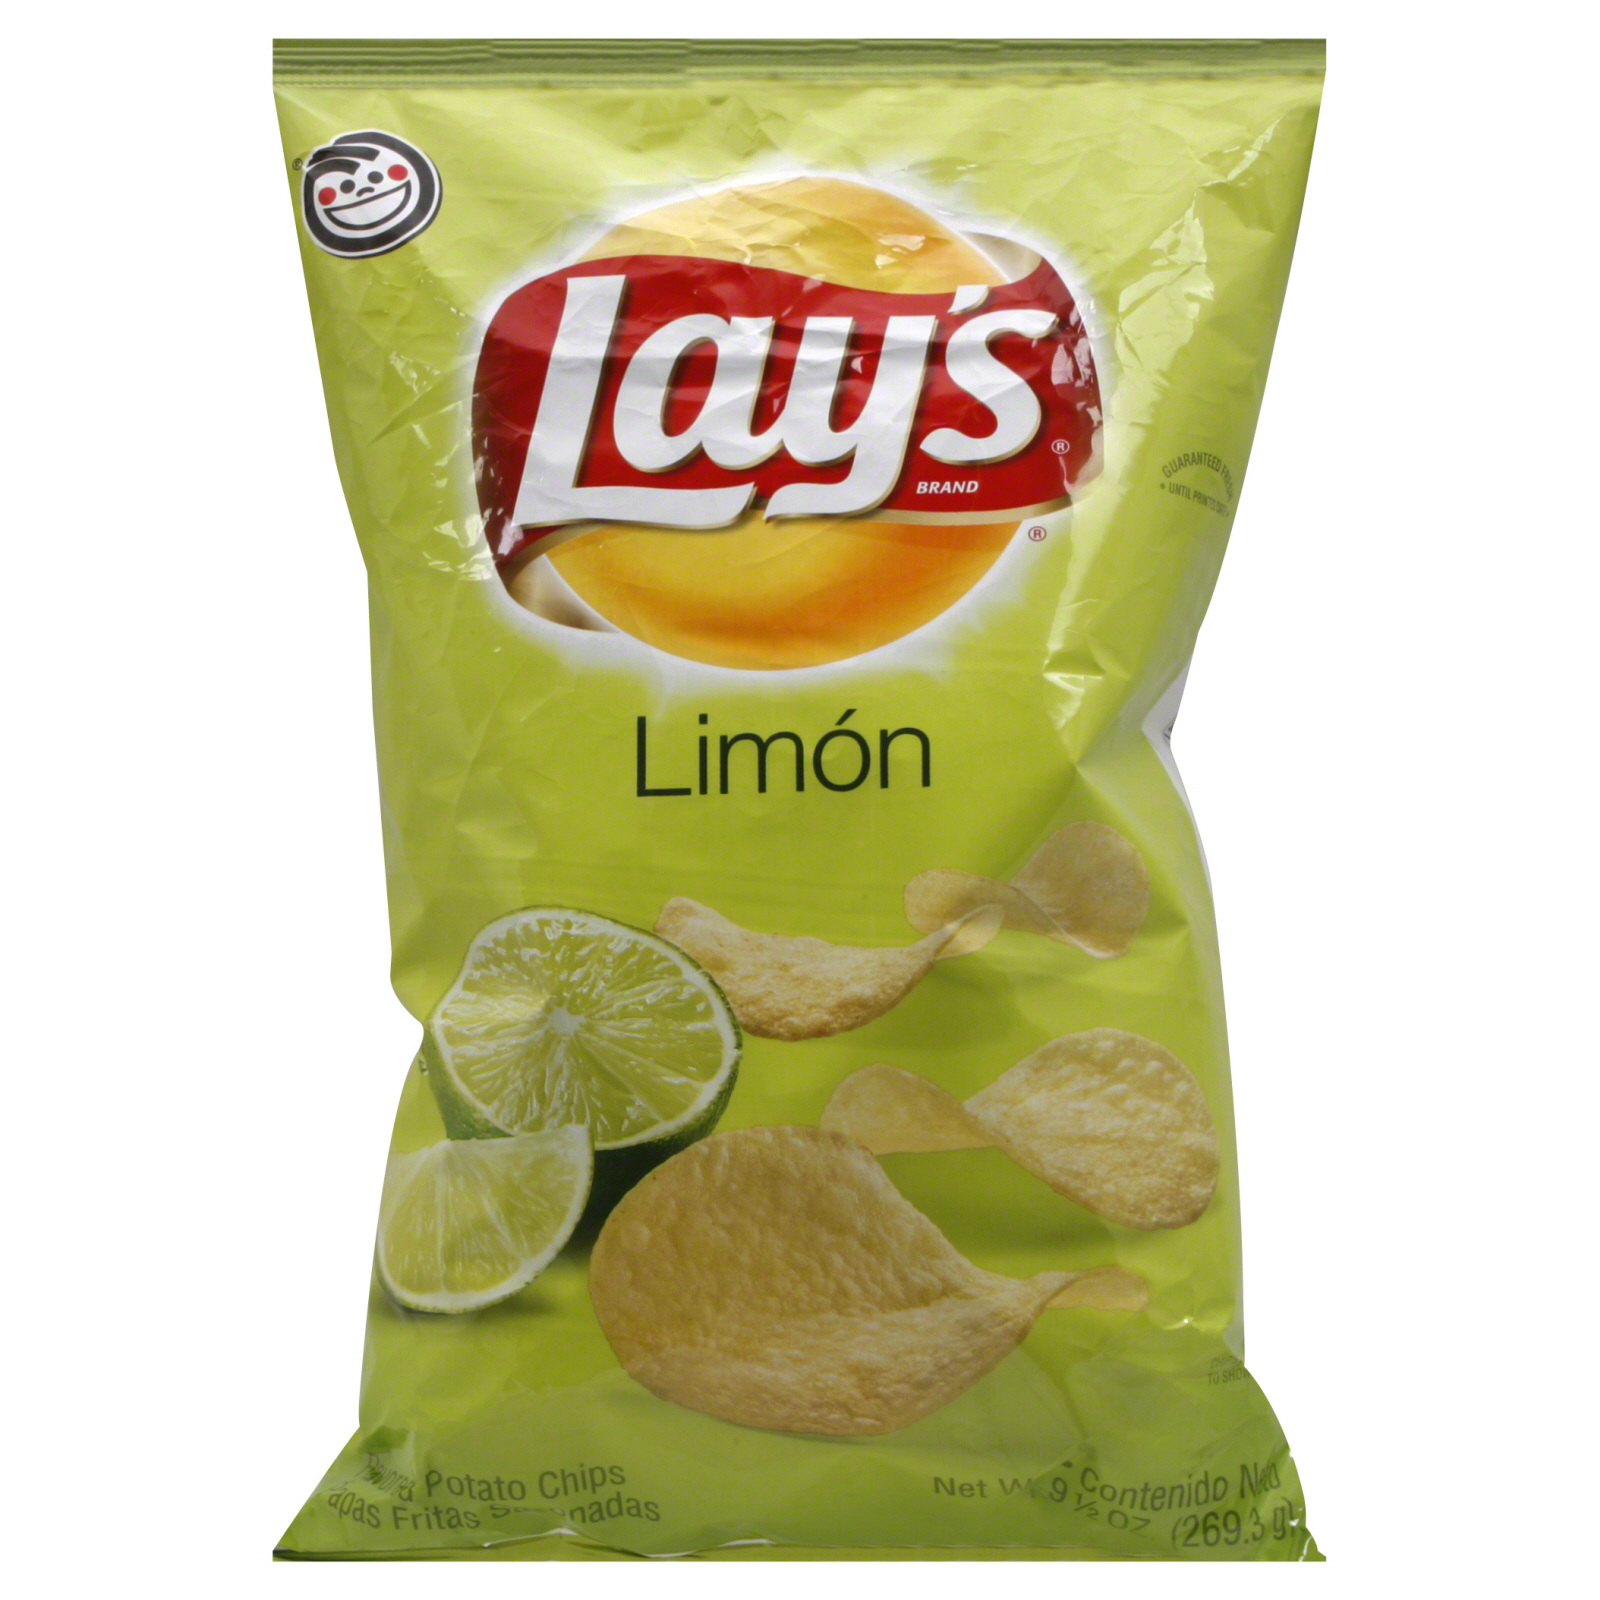 Lay's Limon Flavored Potato Chips, 9.5 oz (269.3 g)